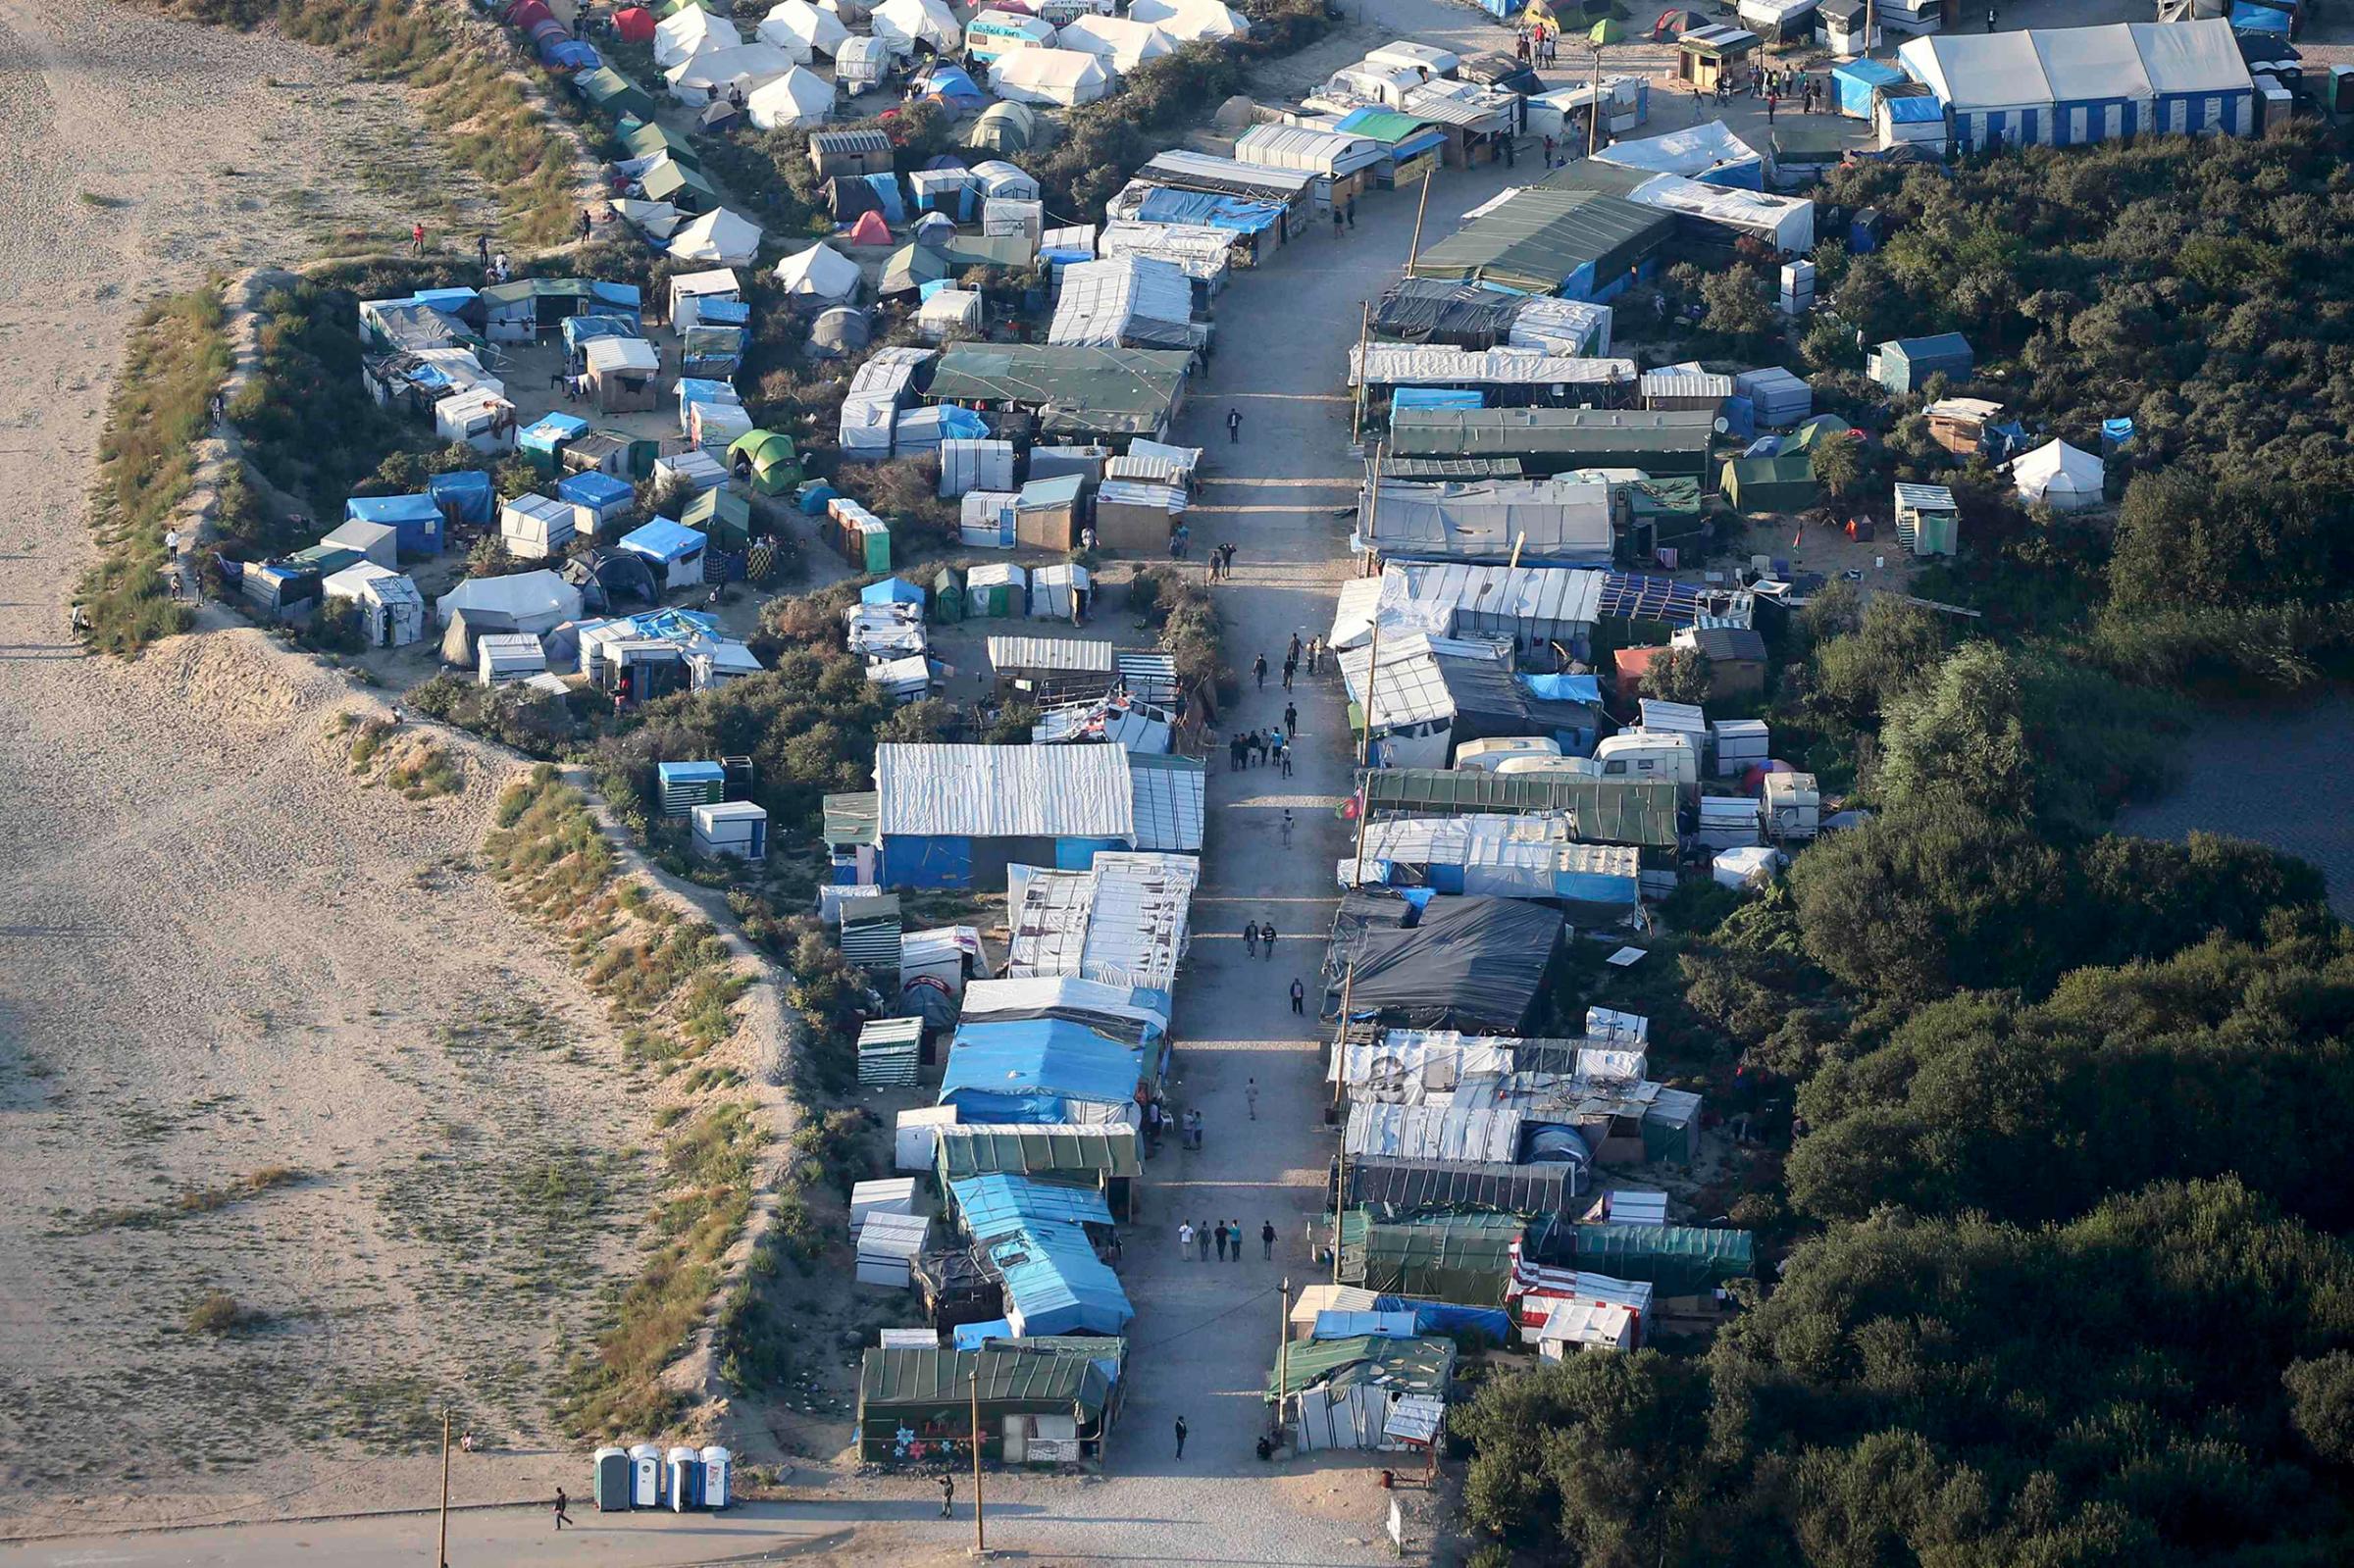 An aerial view shows makeshift shelters and tents where migrants live in what is known as "the Jungle," a sprawling camp in Calais, France, on Sept. 7, 2016.